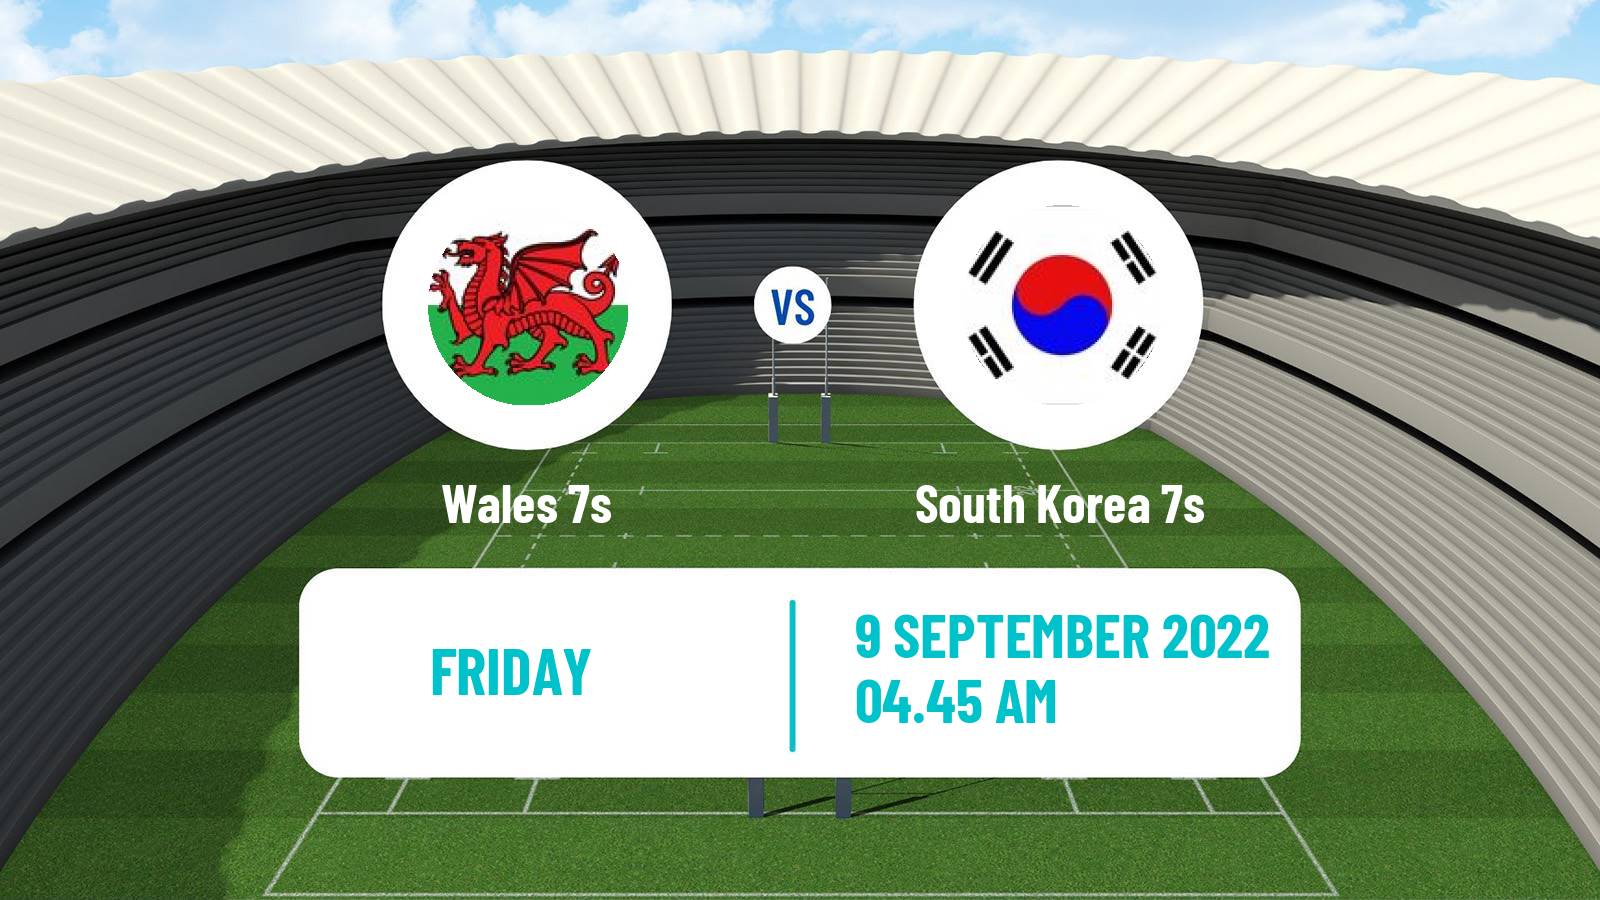 Rugby union Sevens World Cup Wales 7s - South Korea 7s